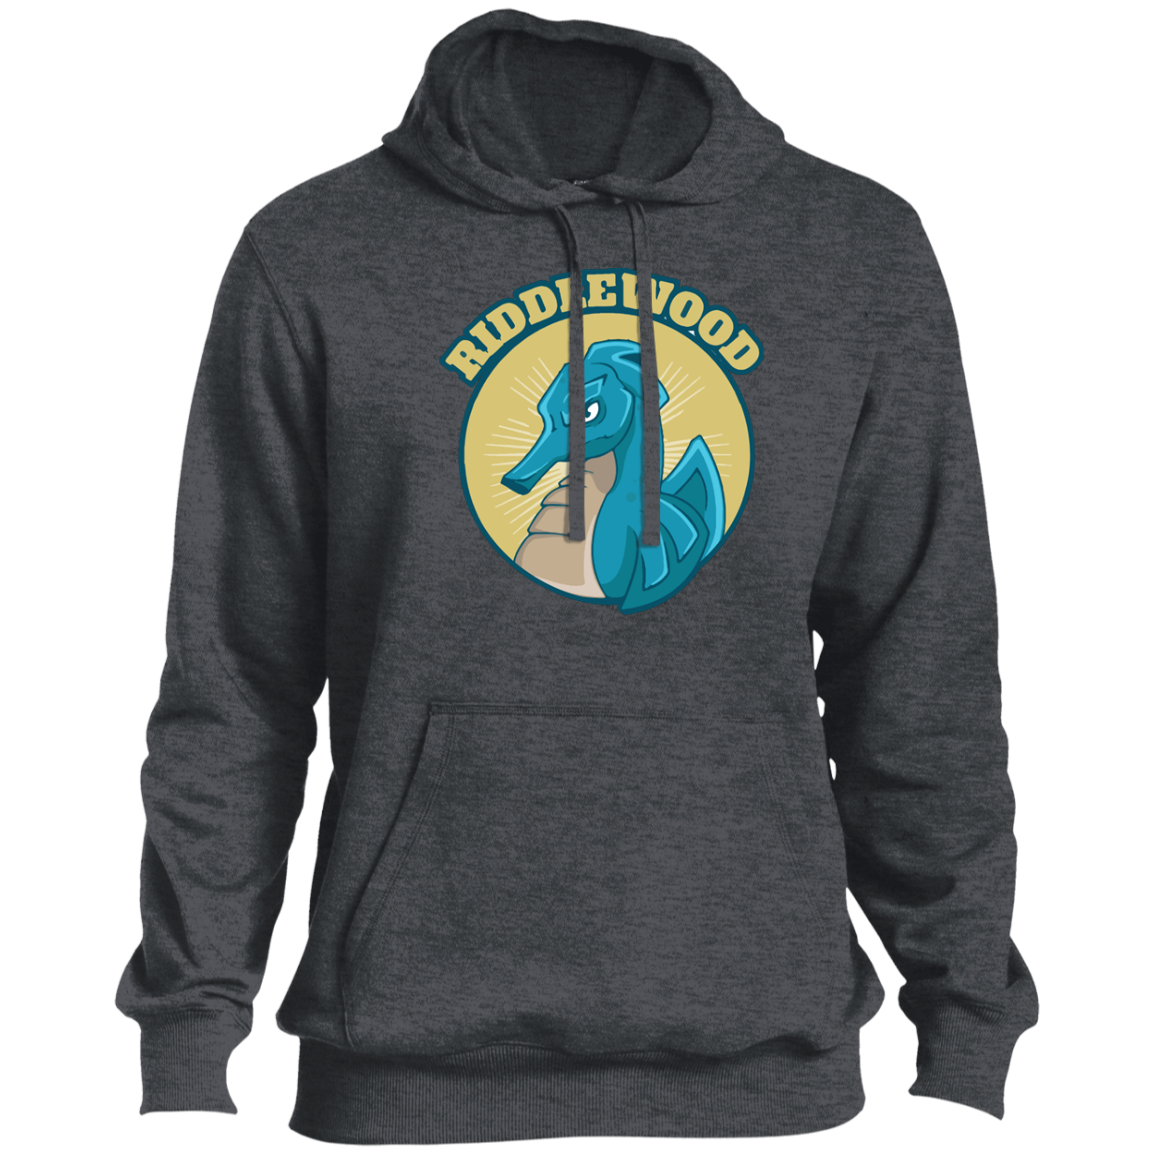 Riddlewood Team Store Tall Pullover Hoodie